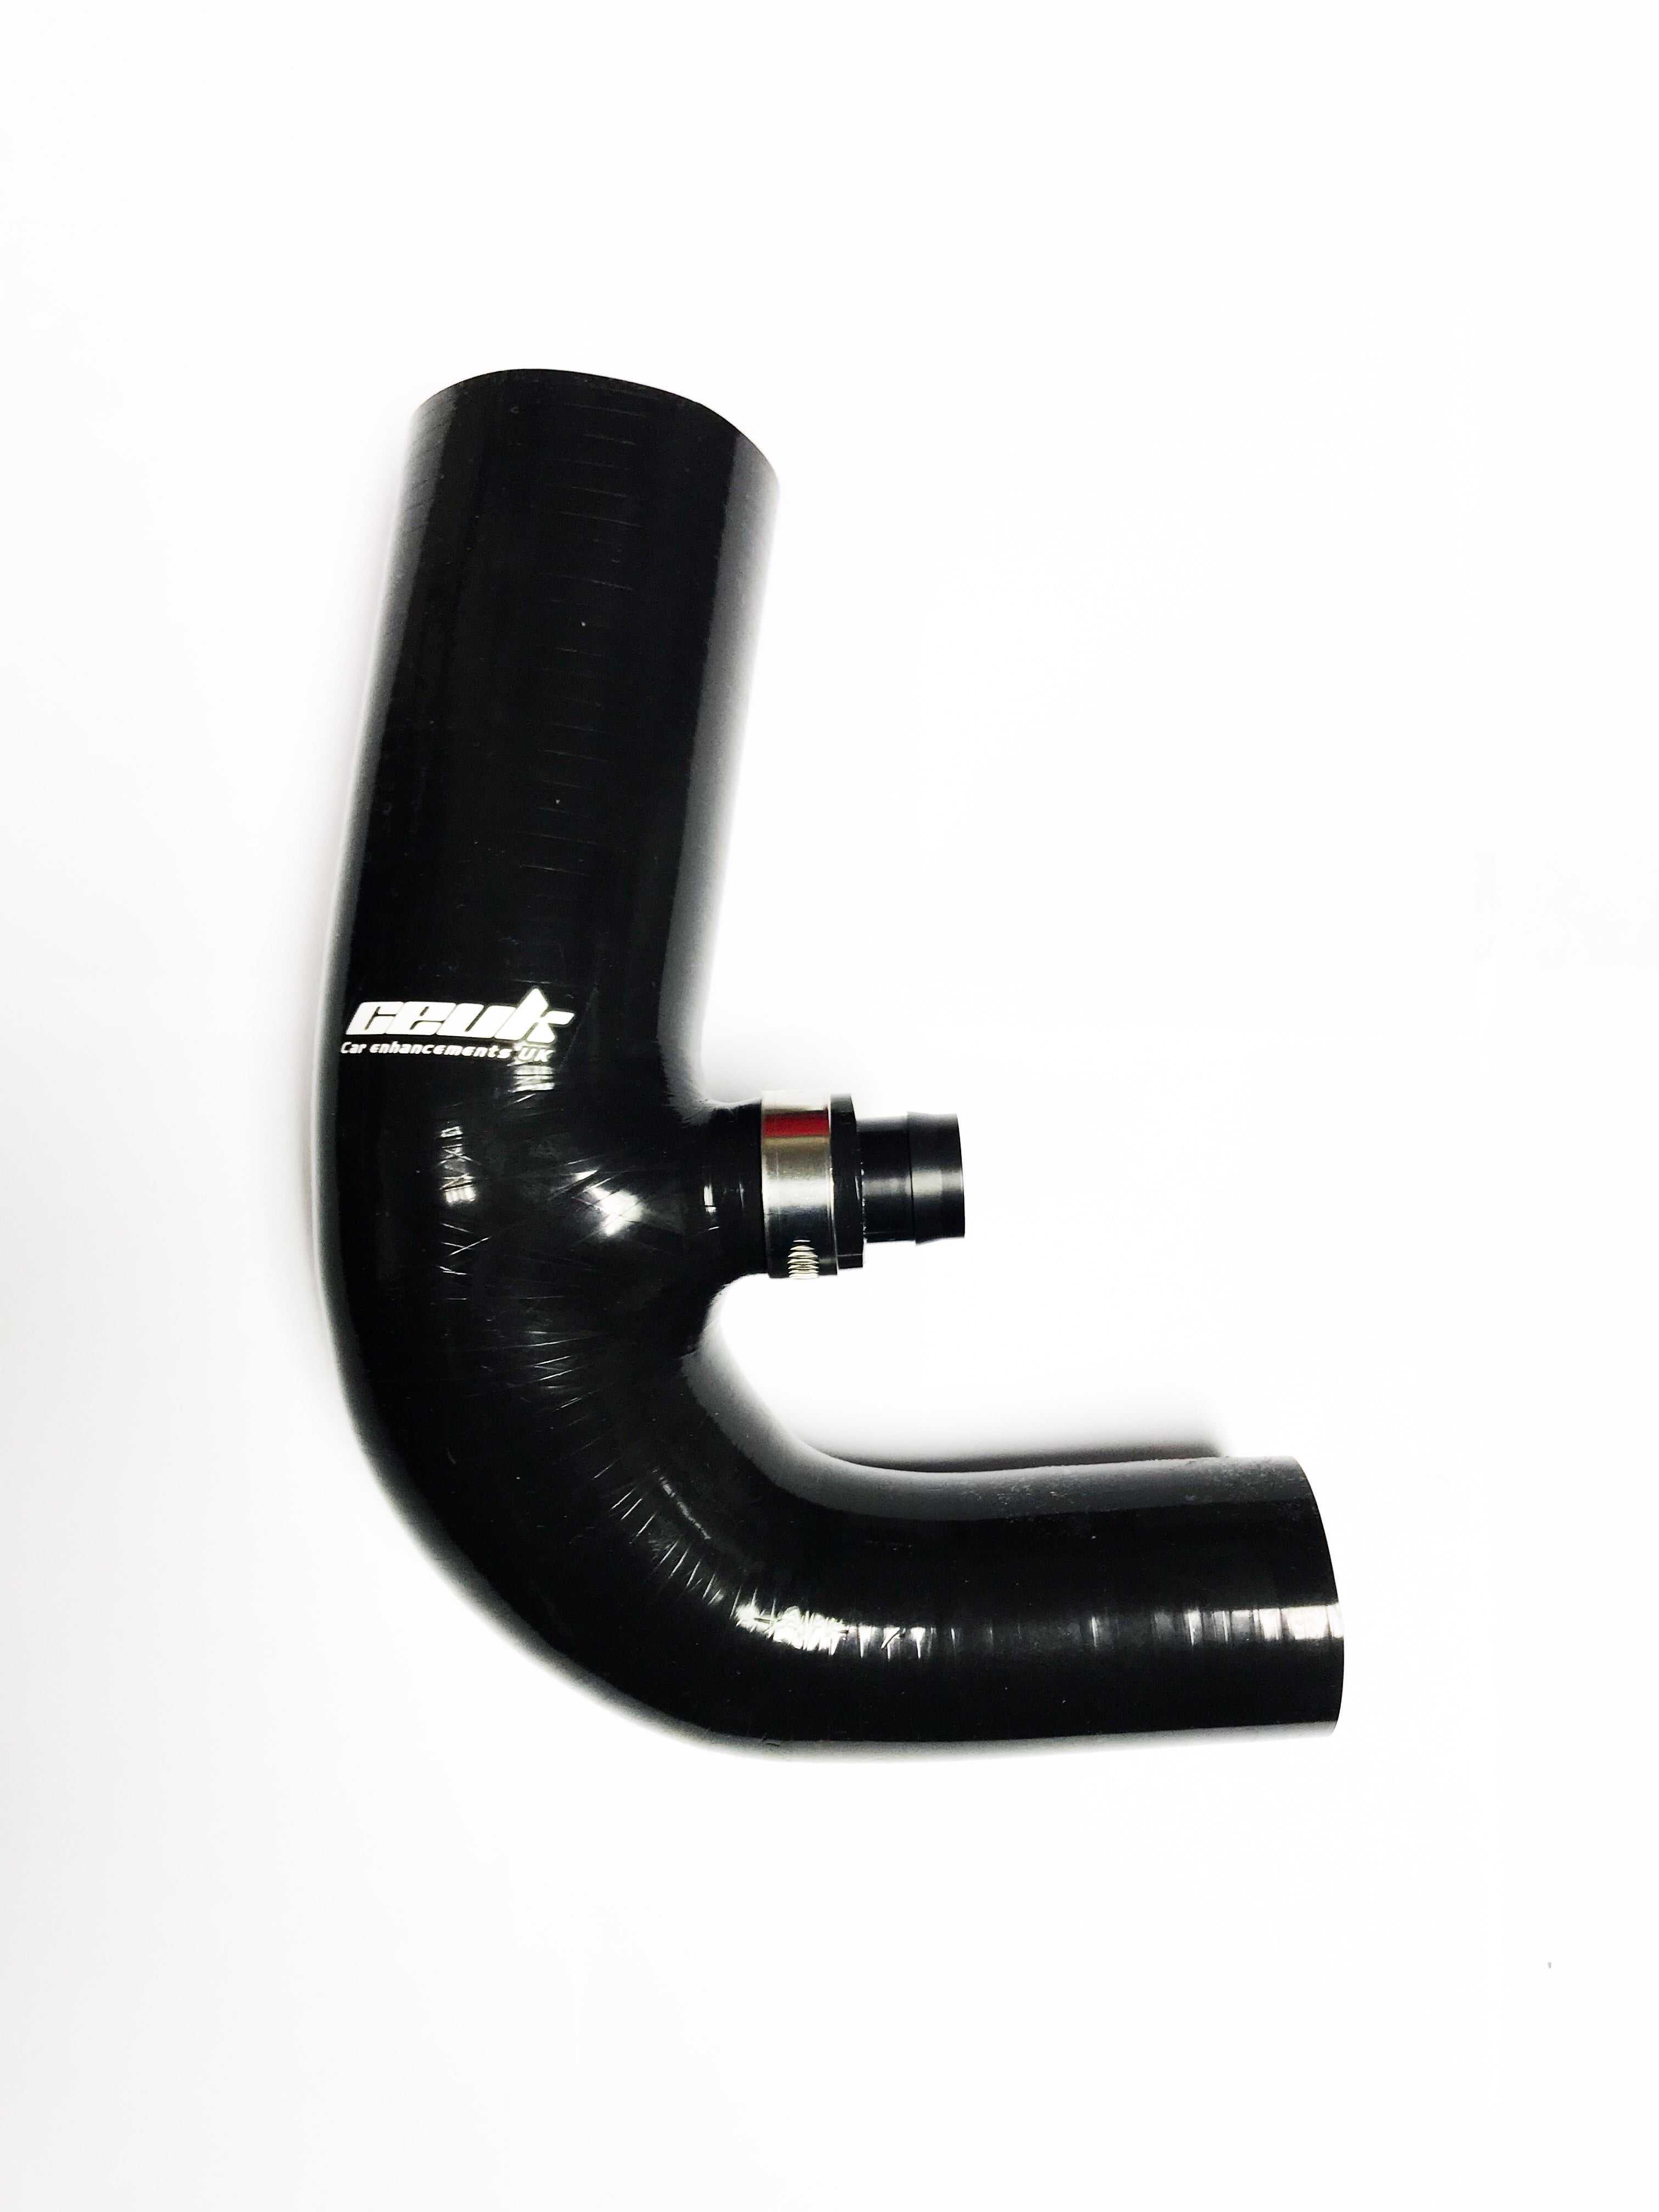 Enhanced Performance, Ford Focus MK3 1.0 Eco-Boost Secondary Induction Hose Kit - Enhanced Performance